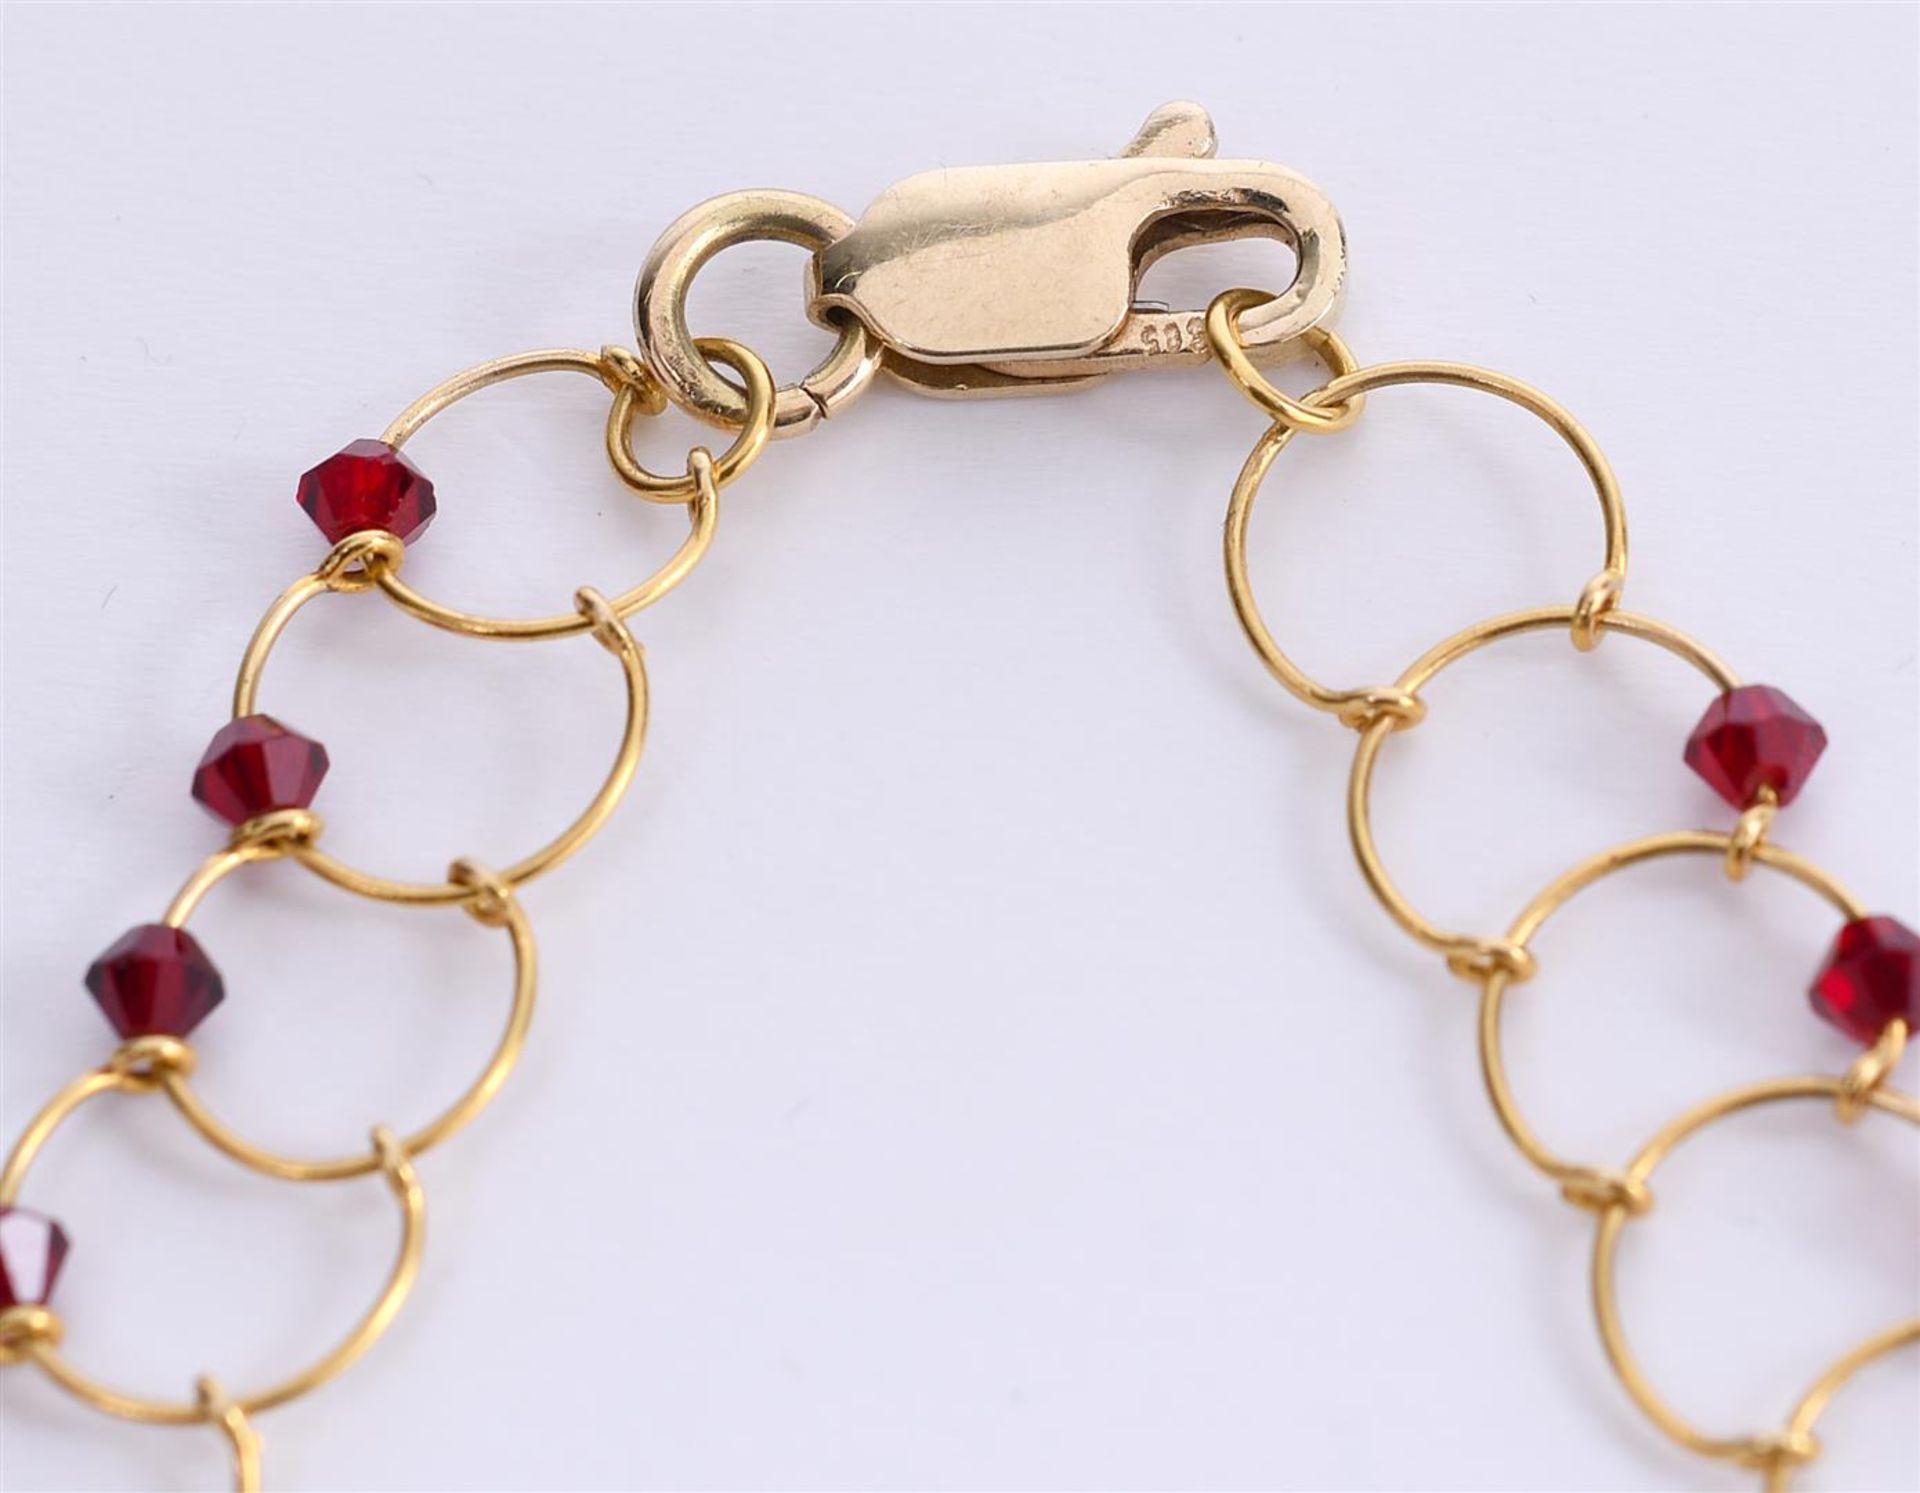 14 kt yellow gold wire necklace set with red crystal stones. Necklace length 41cm - Bild 5 aus 6